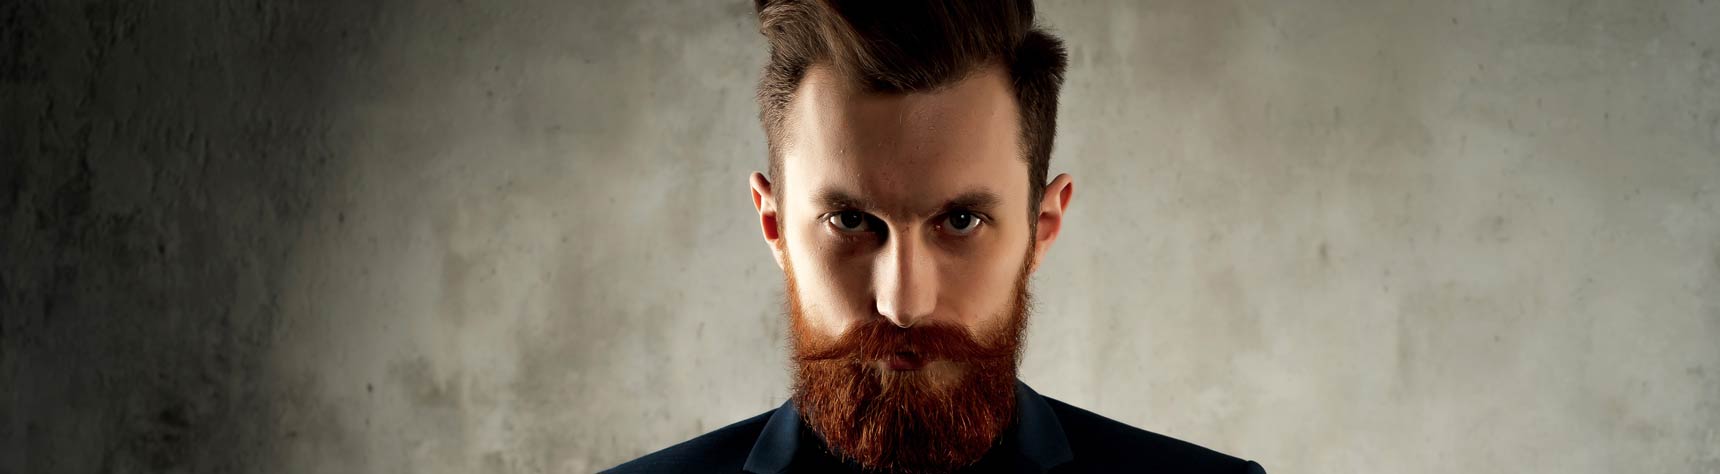 beard care products for men